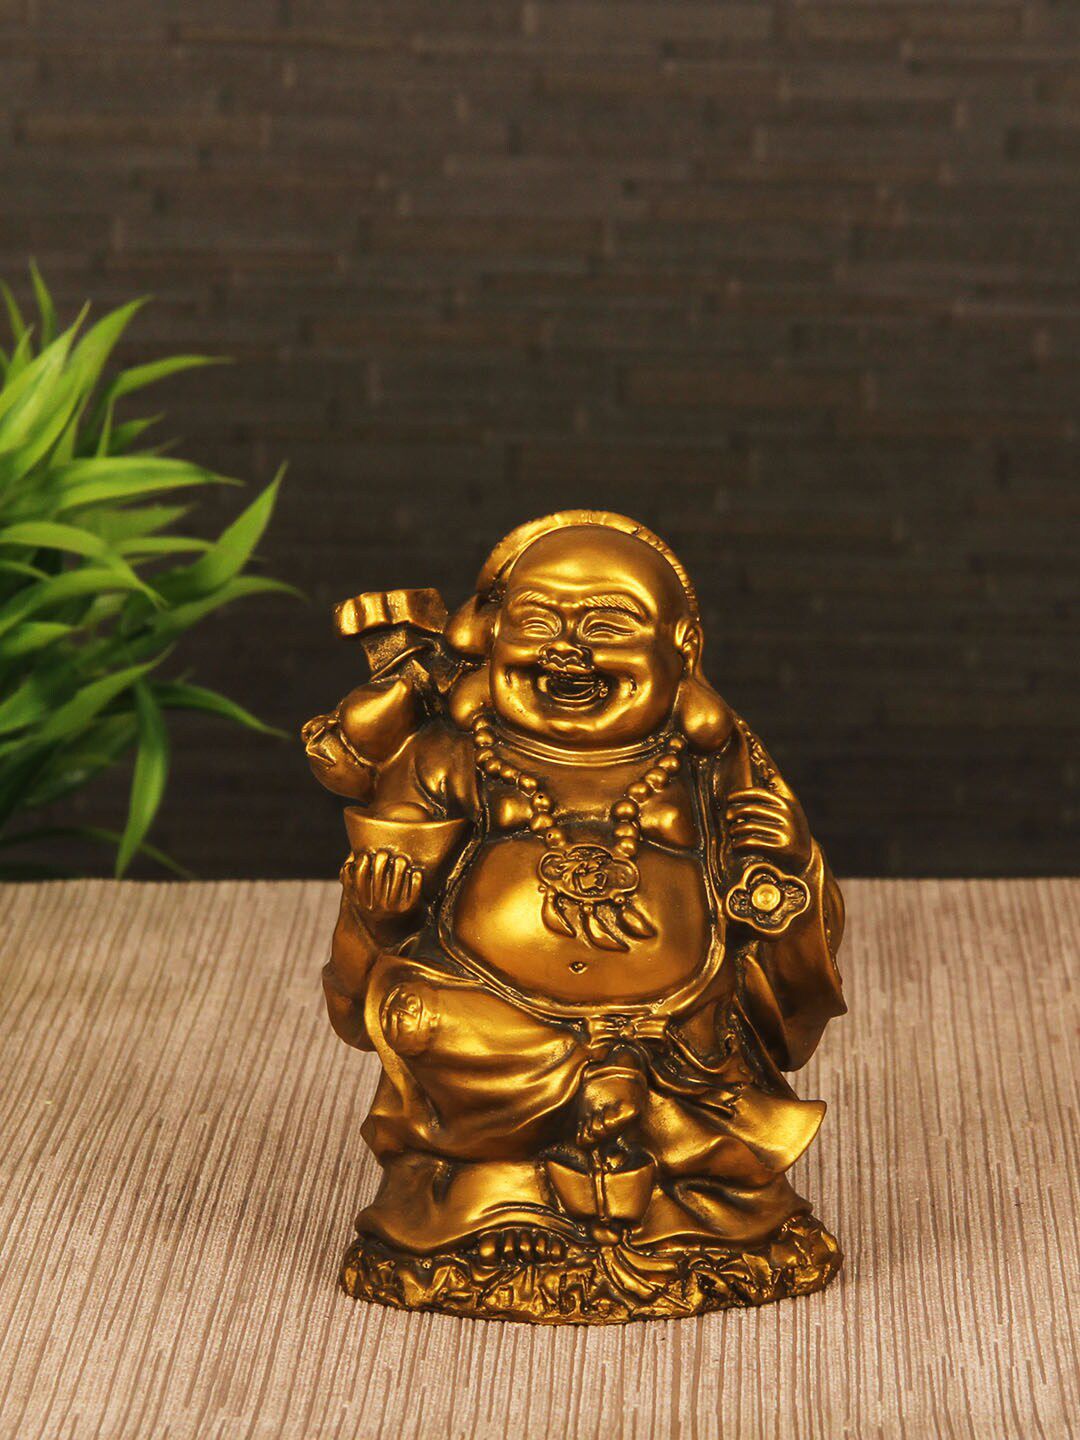 TIED RIBBONS Gold-Toned Laughing Buddha Figurine Showpiece Price in India